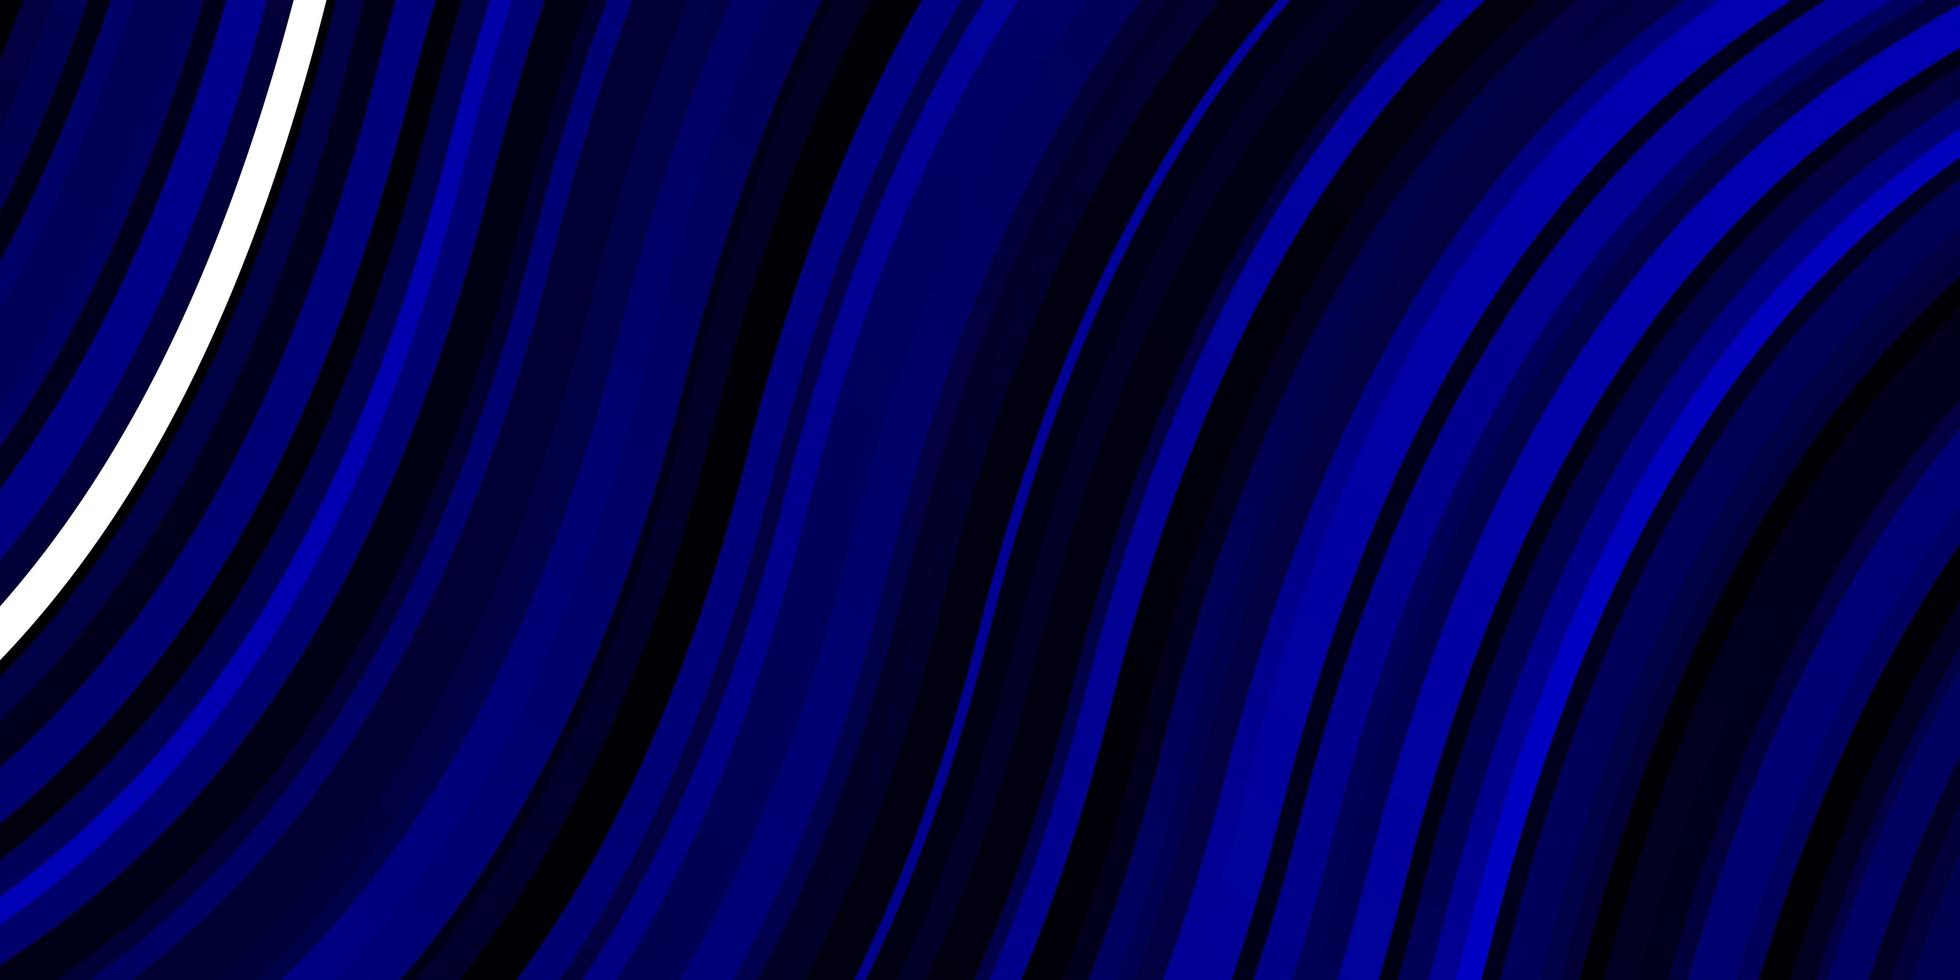 Dark BLUE vector background with bent lines. Colorful abstract illustration with gradient curves. Best design for your posters, banners.